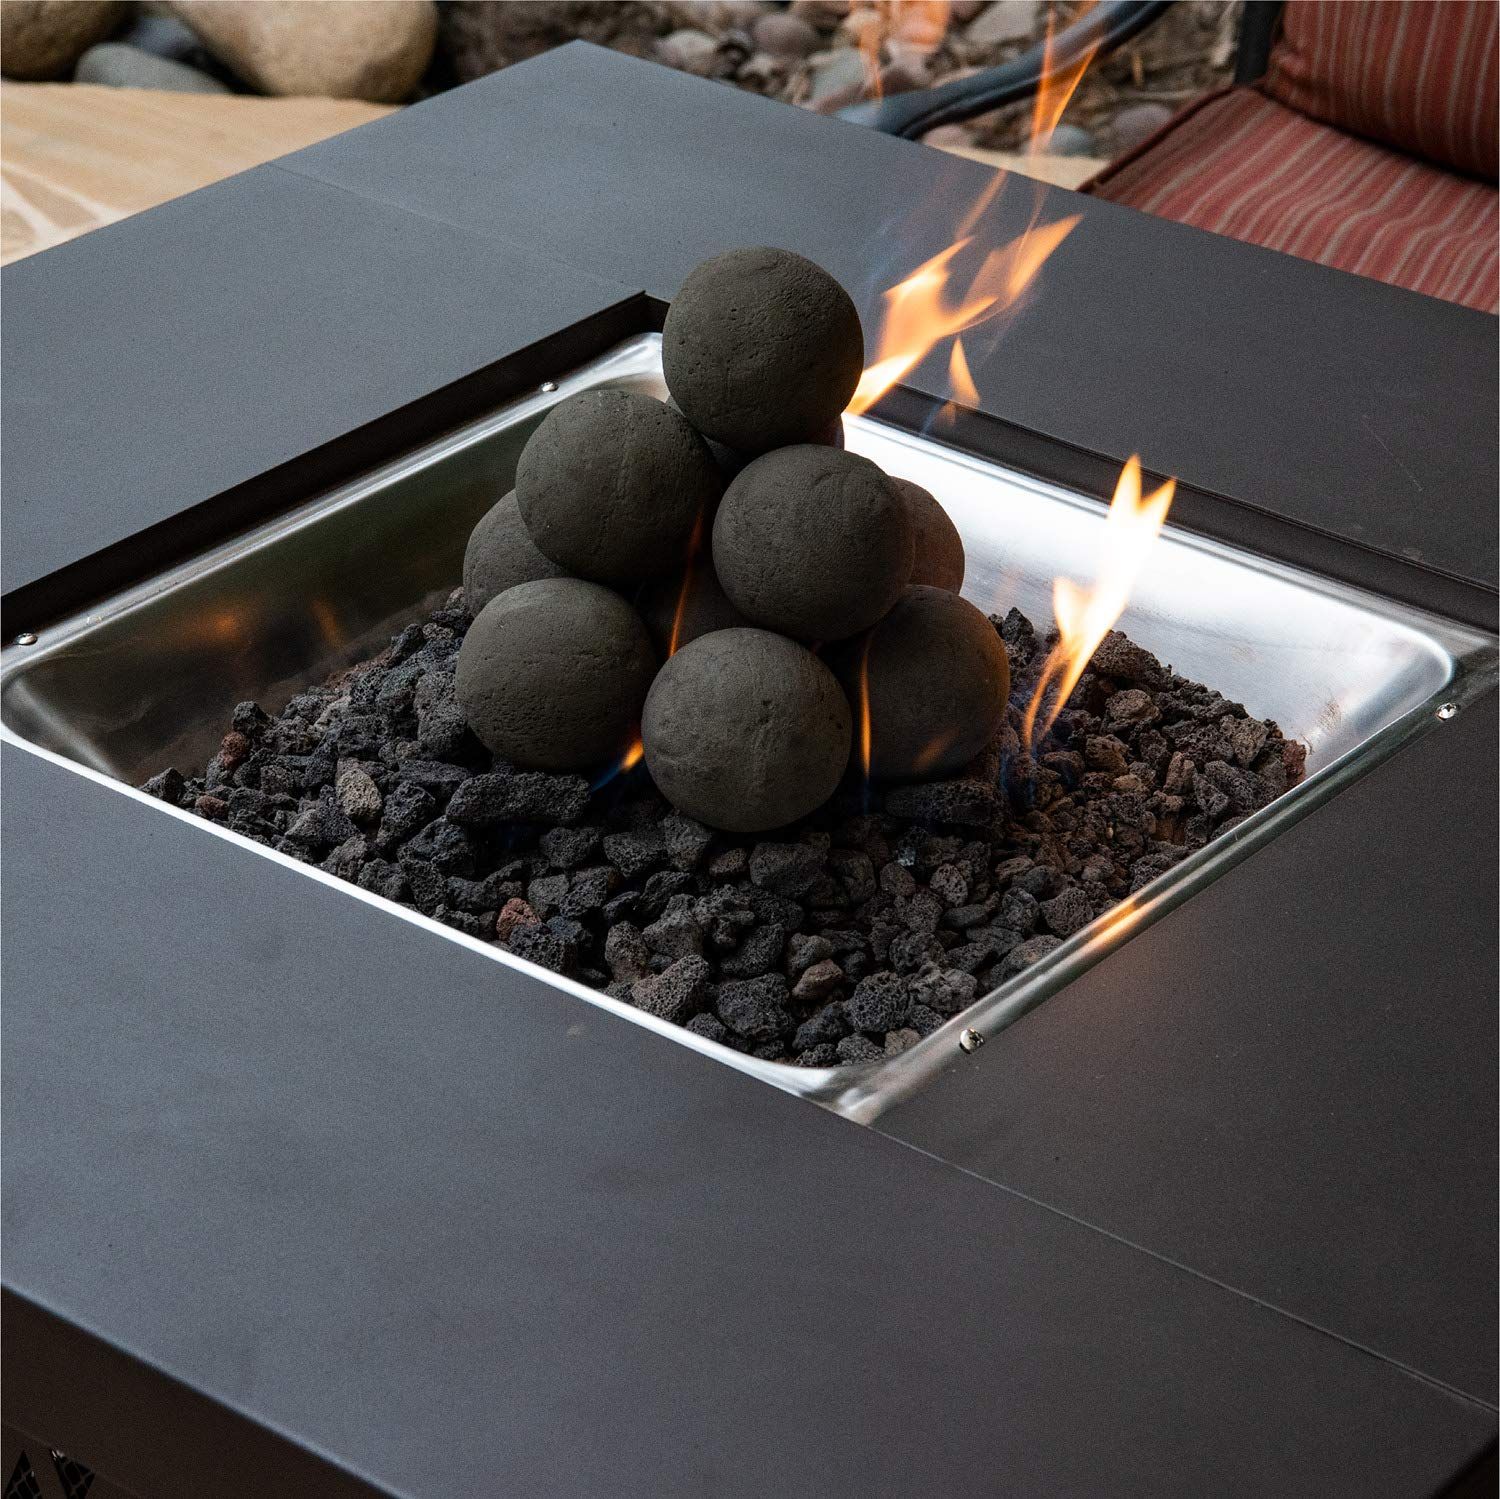 Ceramic Fire Balls | Set of 5 | Modern Accessory for Indoor and Outdoor Fire Pits or Fireplaces ... | Amazon (US)